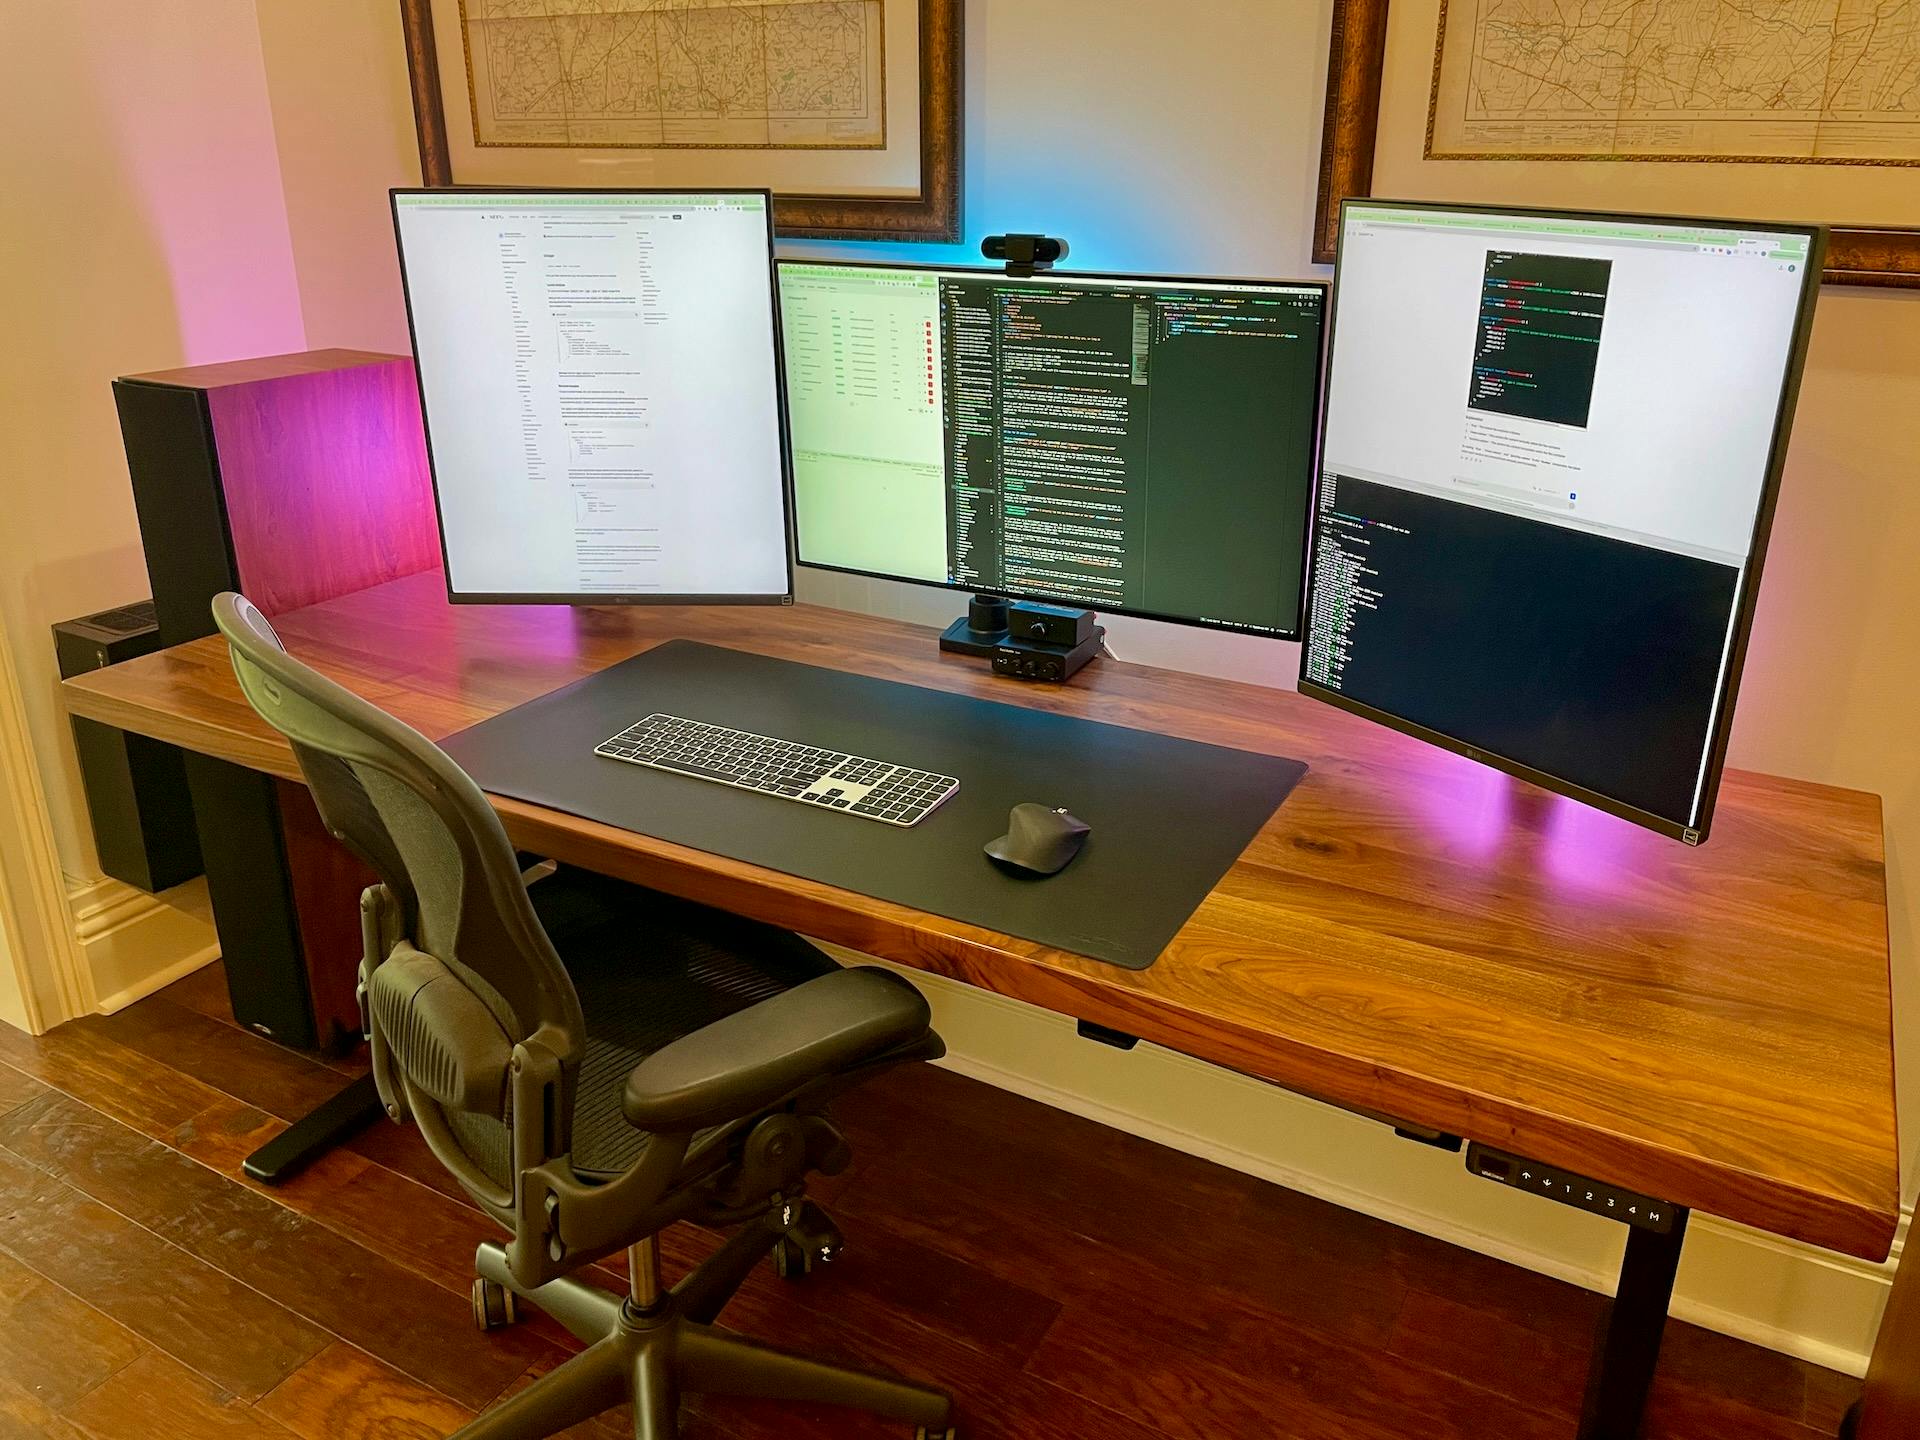 What my desk currently looks like. A 32" 4k screen flanked by 2x 16:18 ratio screens. Laptop stowed beneath.